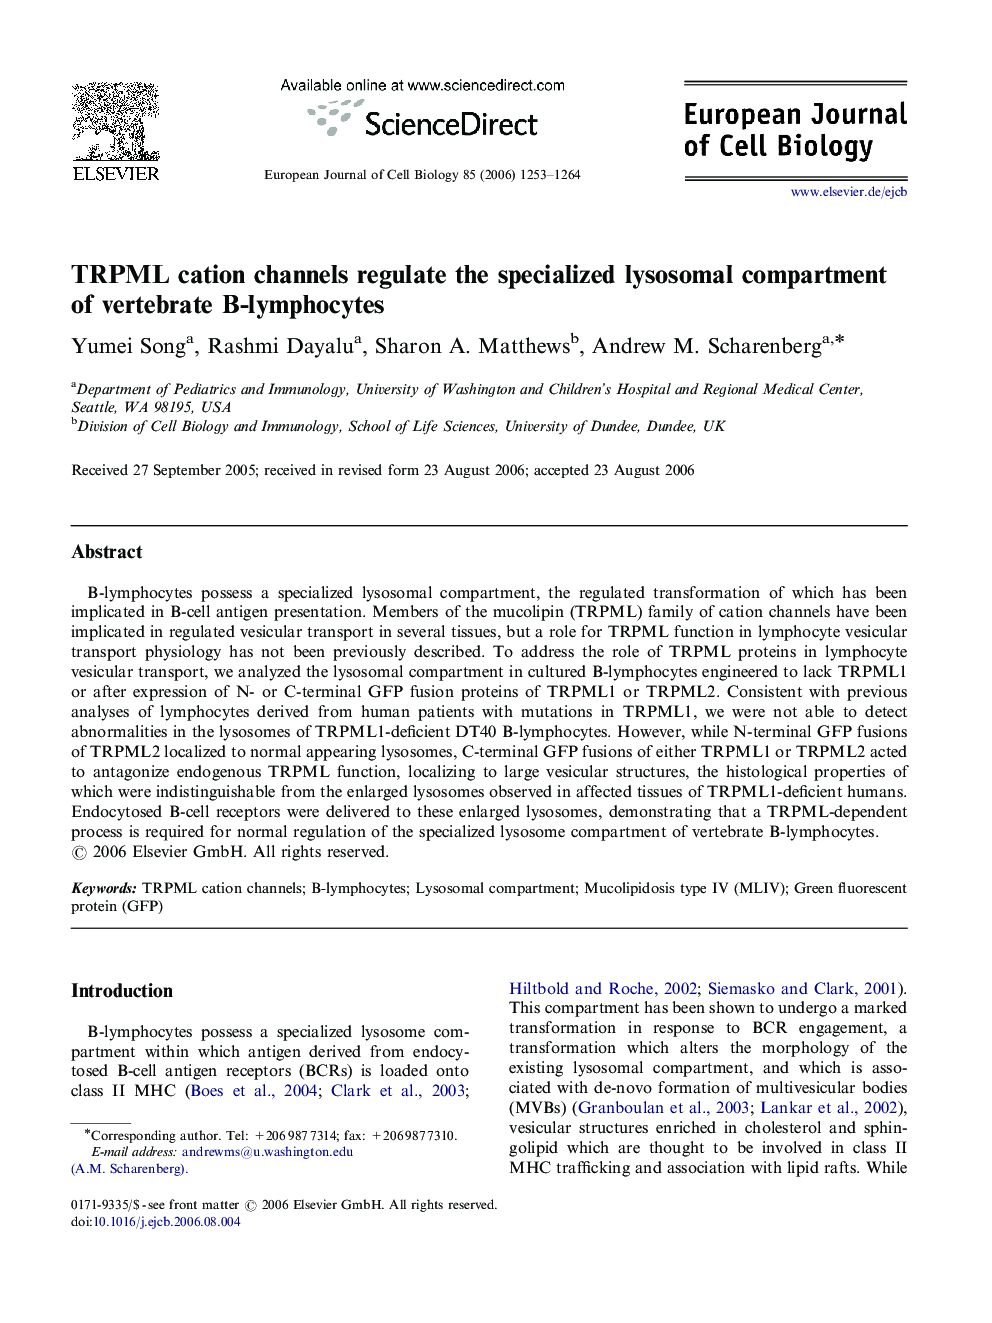 TRPML cation channels regulate the specialized lysosomal compartment of vertebrate B-lymphocytes